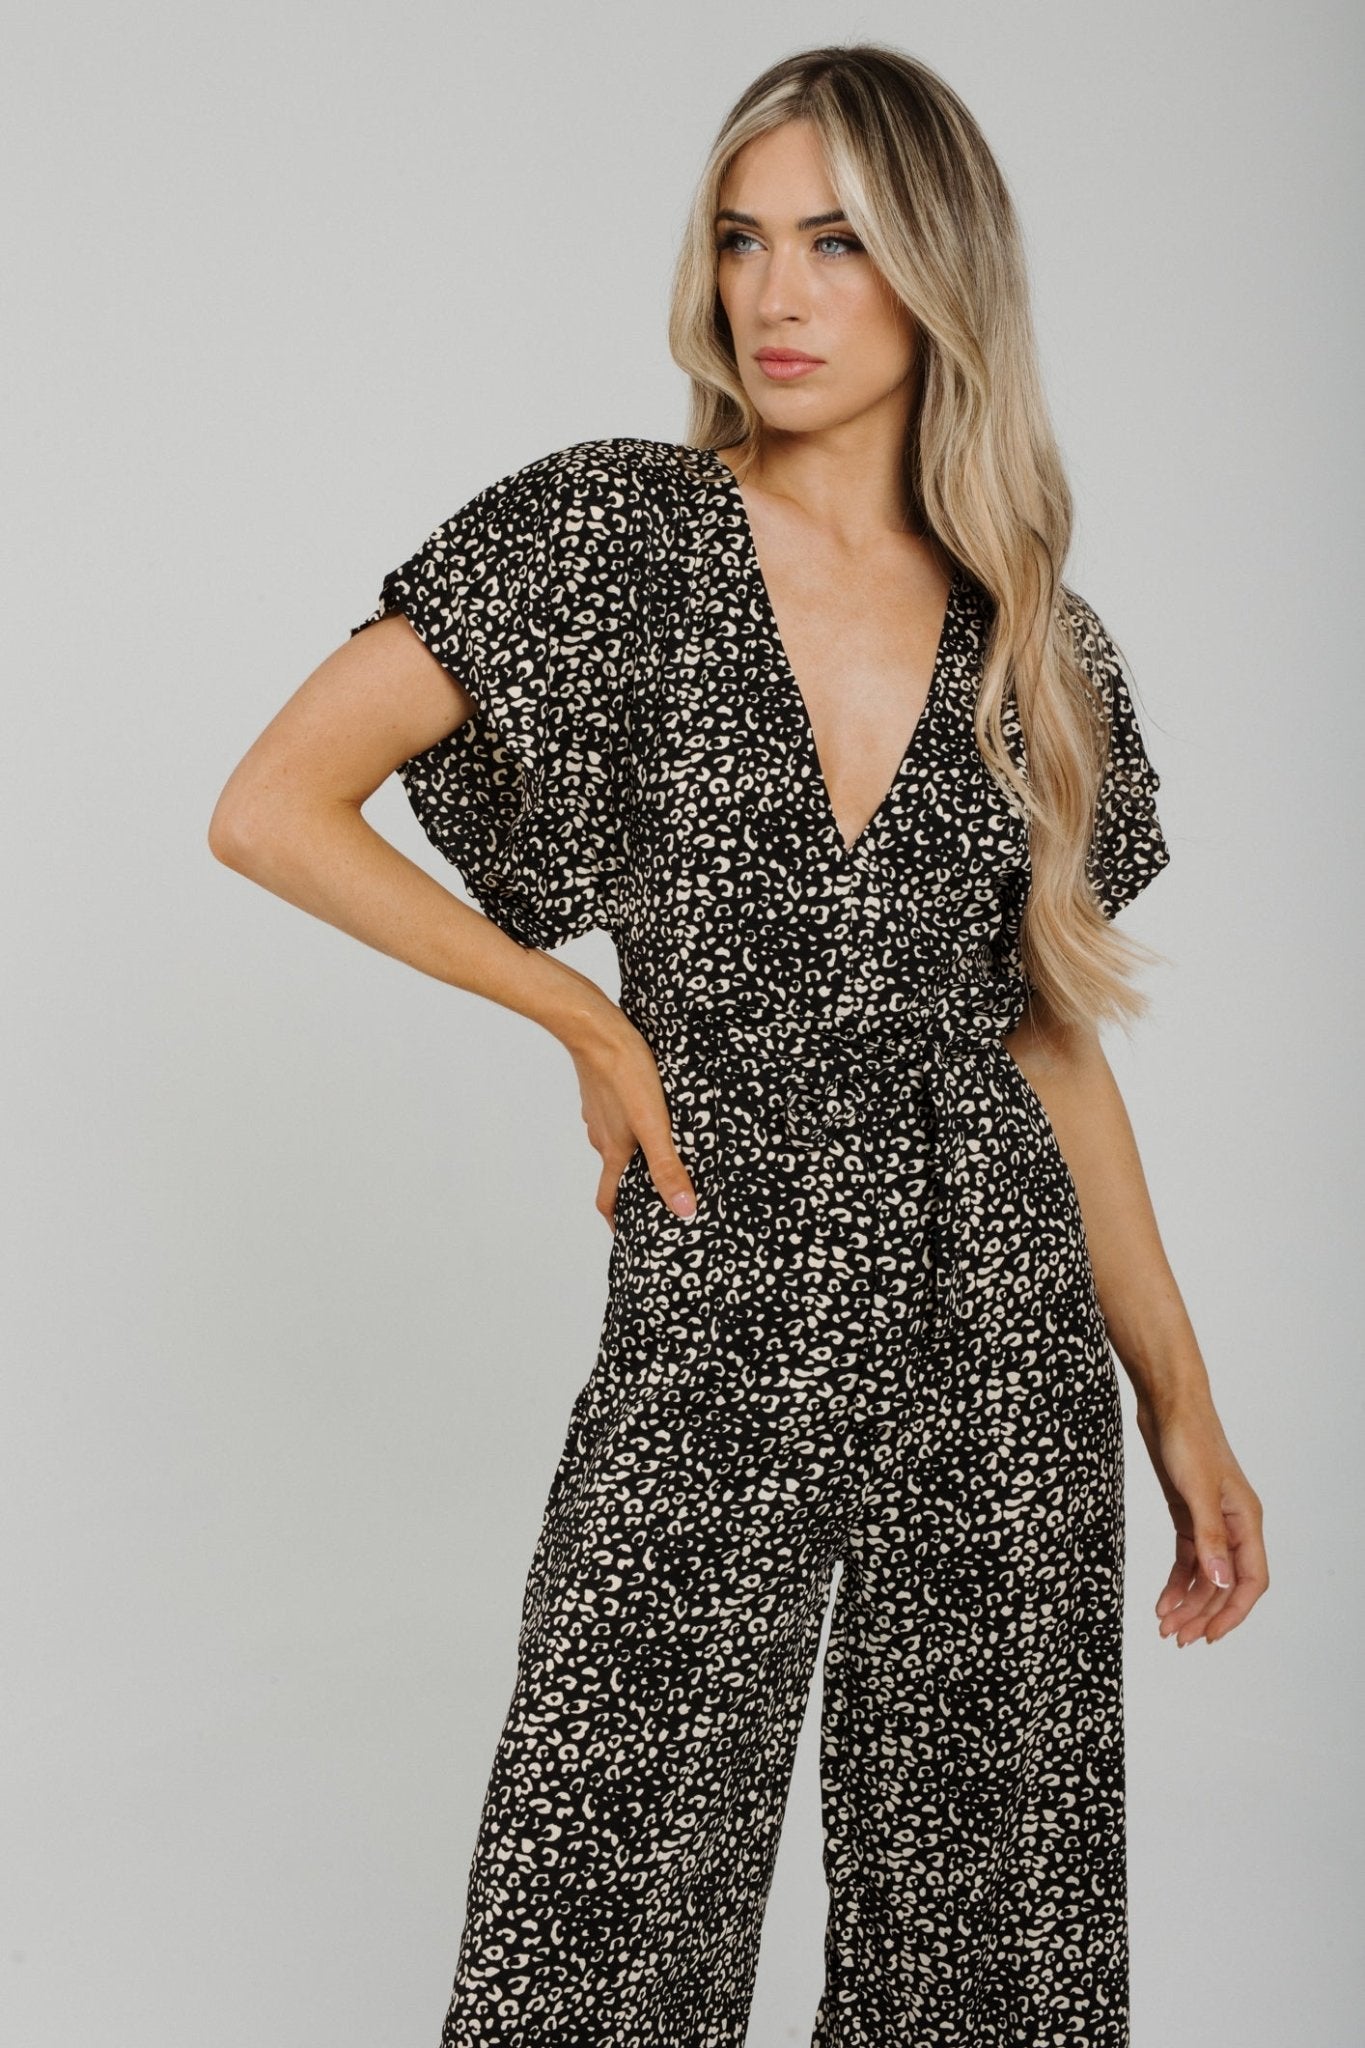 Polly Printed Jumpsuit In Black & Neutral - The Walk in Wardrobe